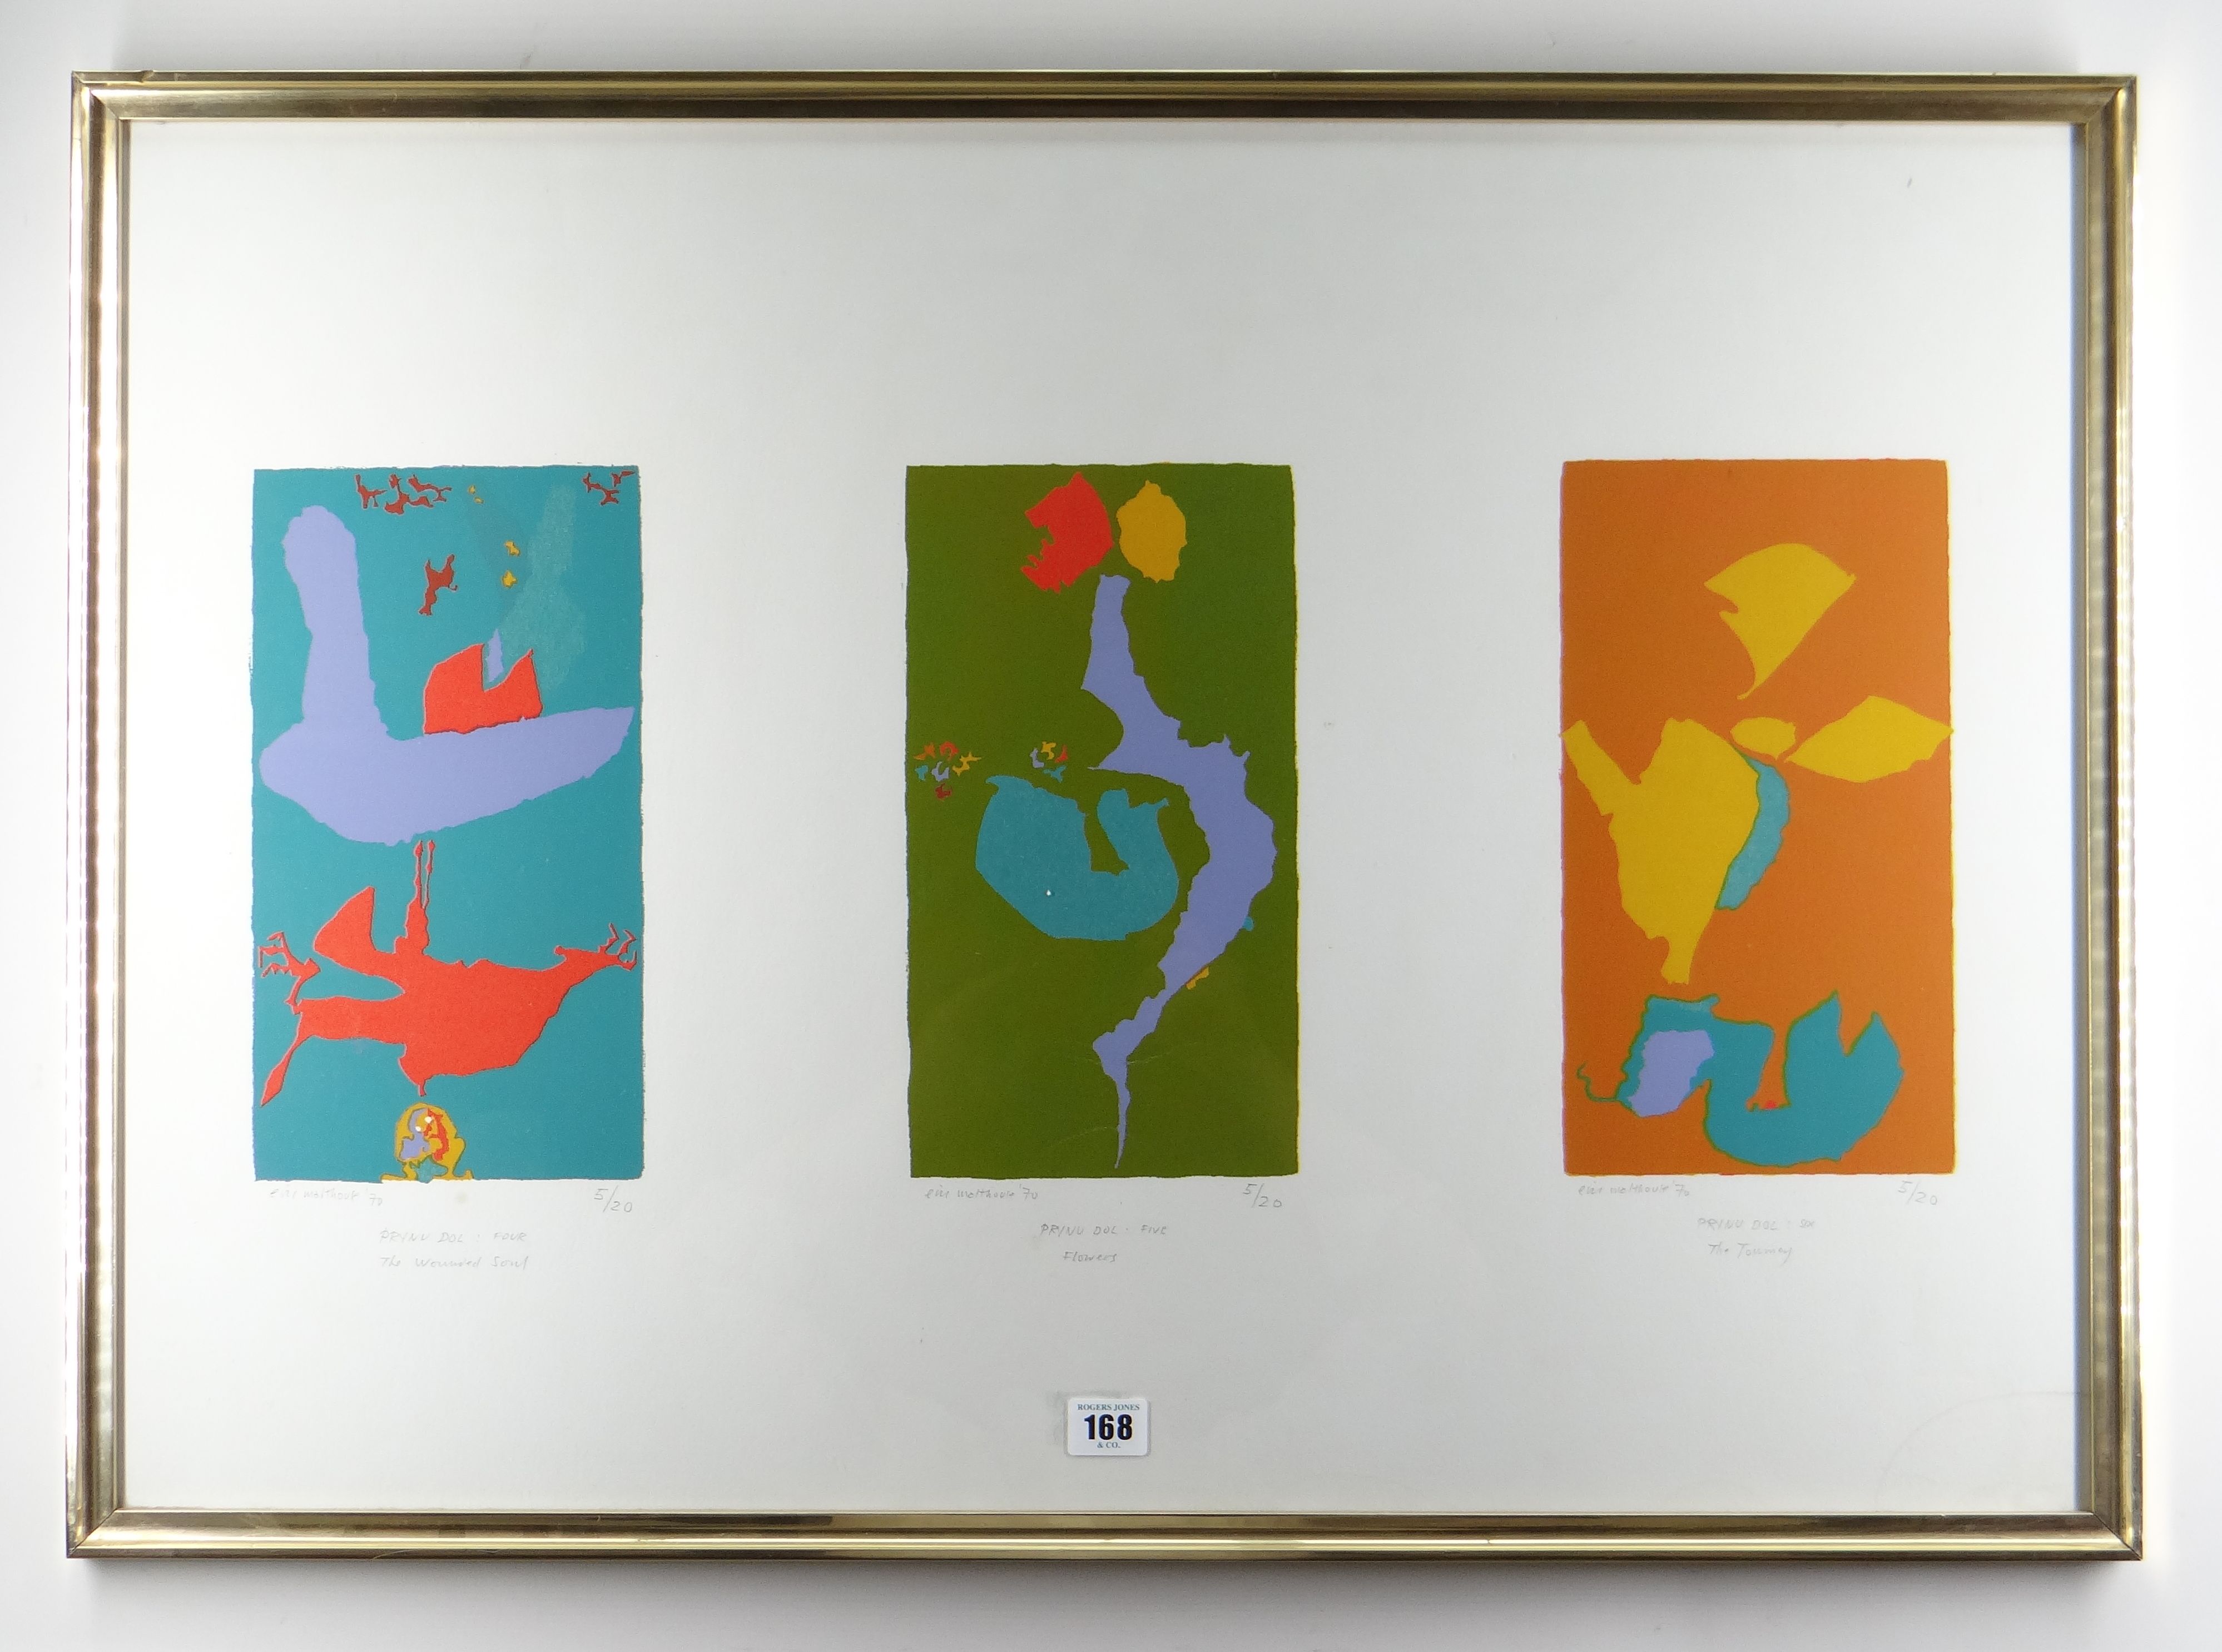 ERIC MALTHOUSE limited edition (5/20) triptych lithograph - entitled 'The Wounded Soul', 'Flowers' - Image 2 of 2